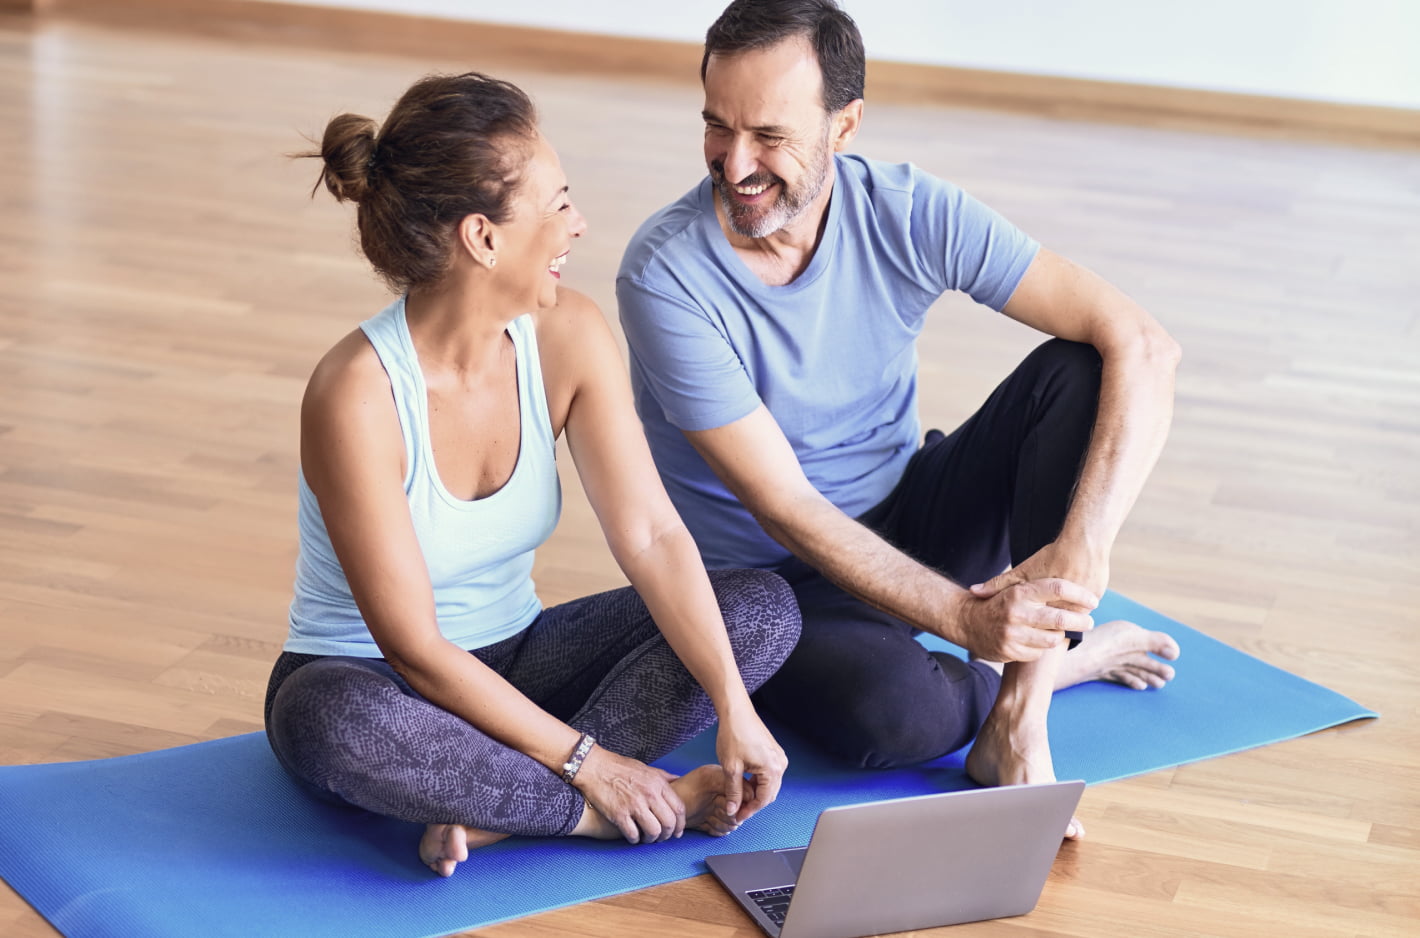 Man and woman chat on yoga mat